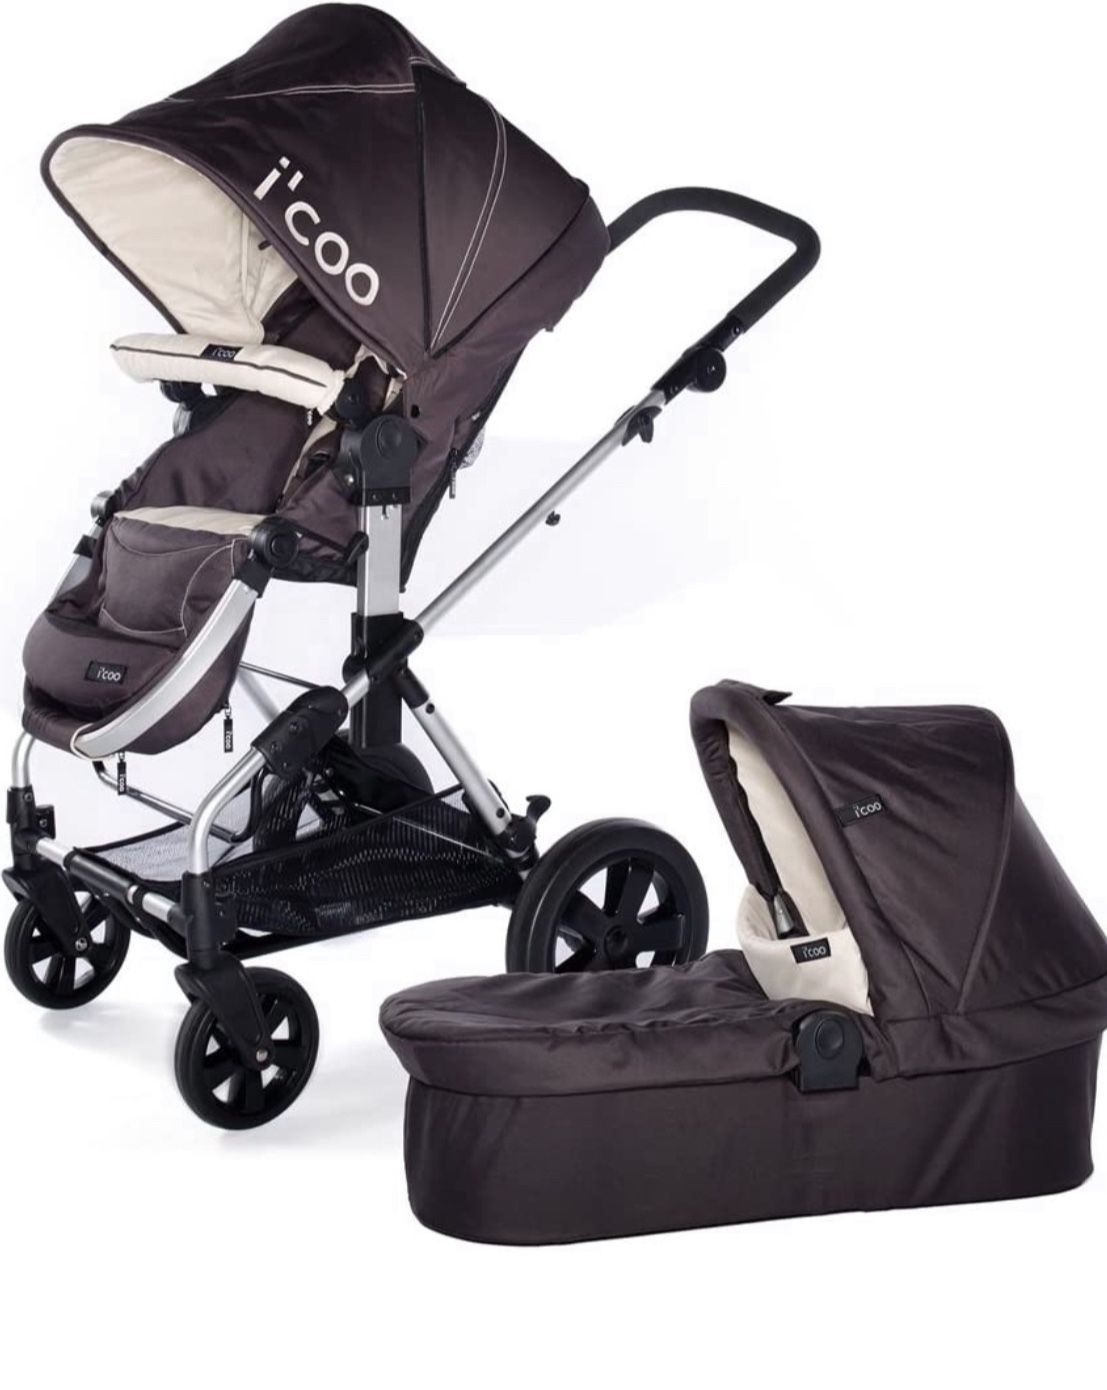 I’Coo Stroller With Bassinet And Car seat Adaptor 